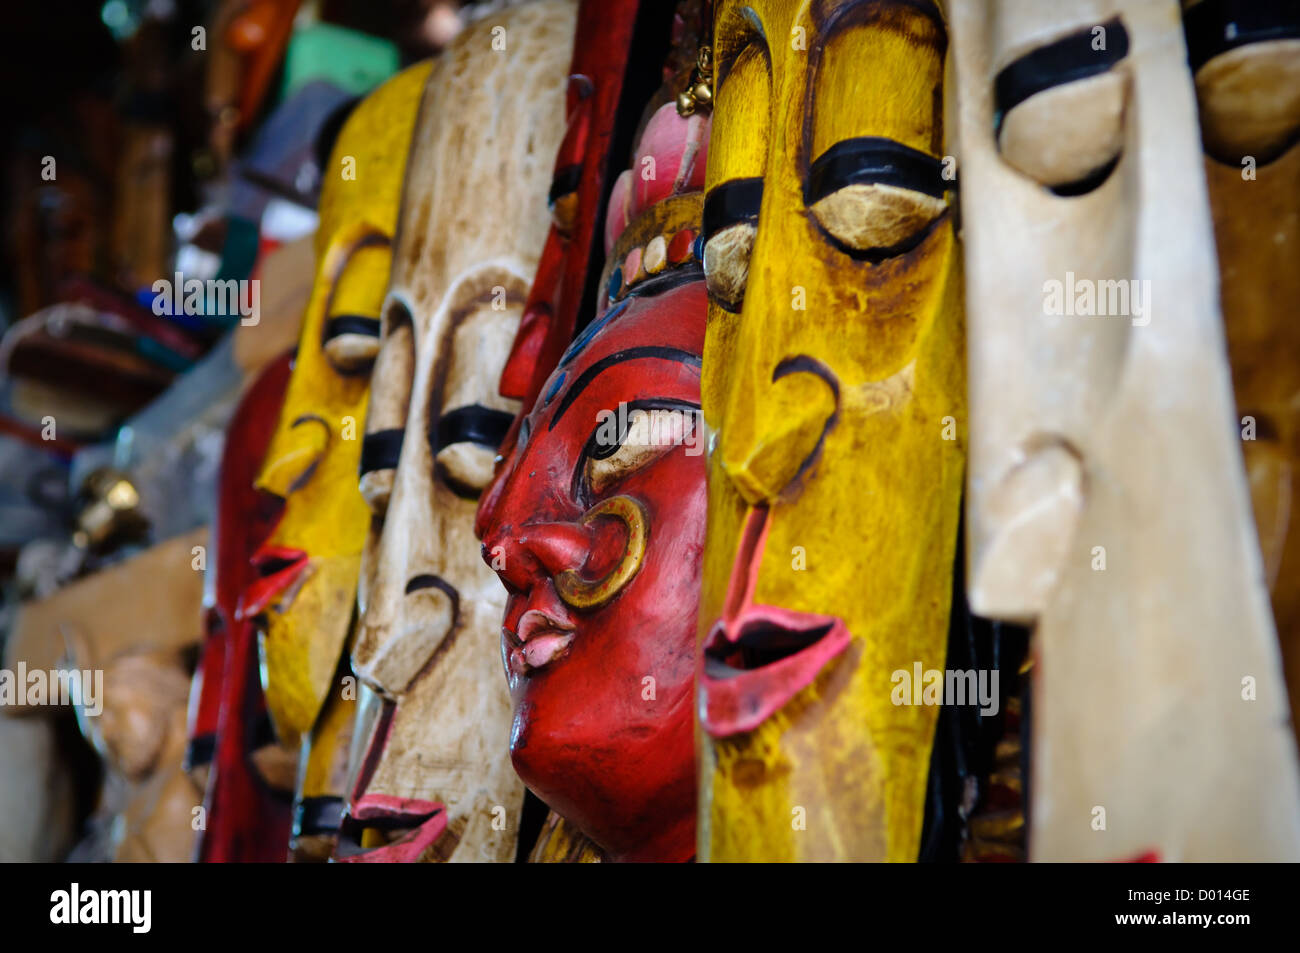 Indian Masks for Sale at Store Stock Photo